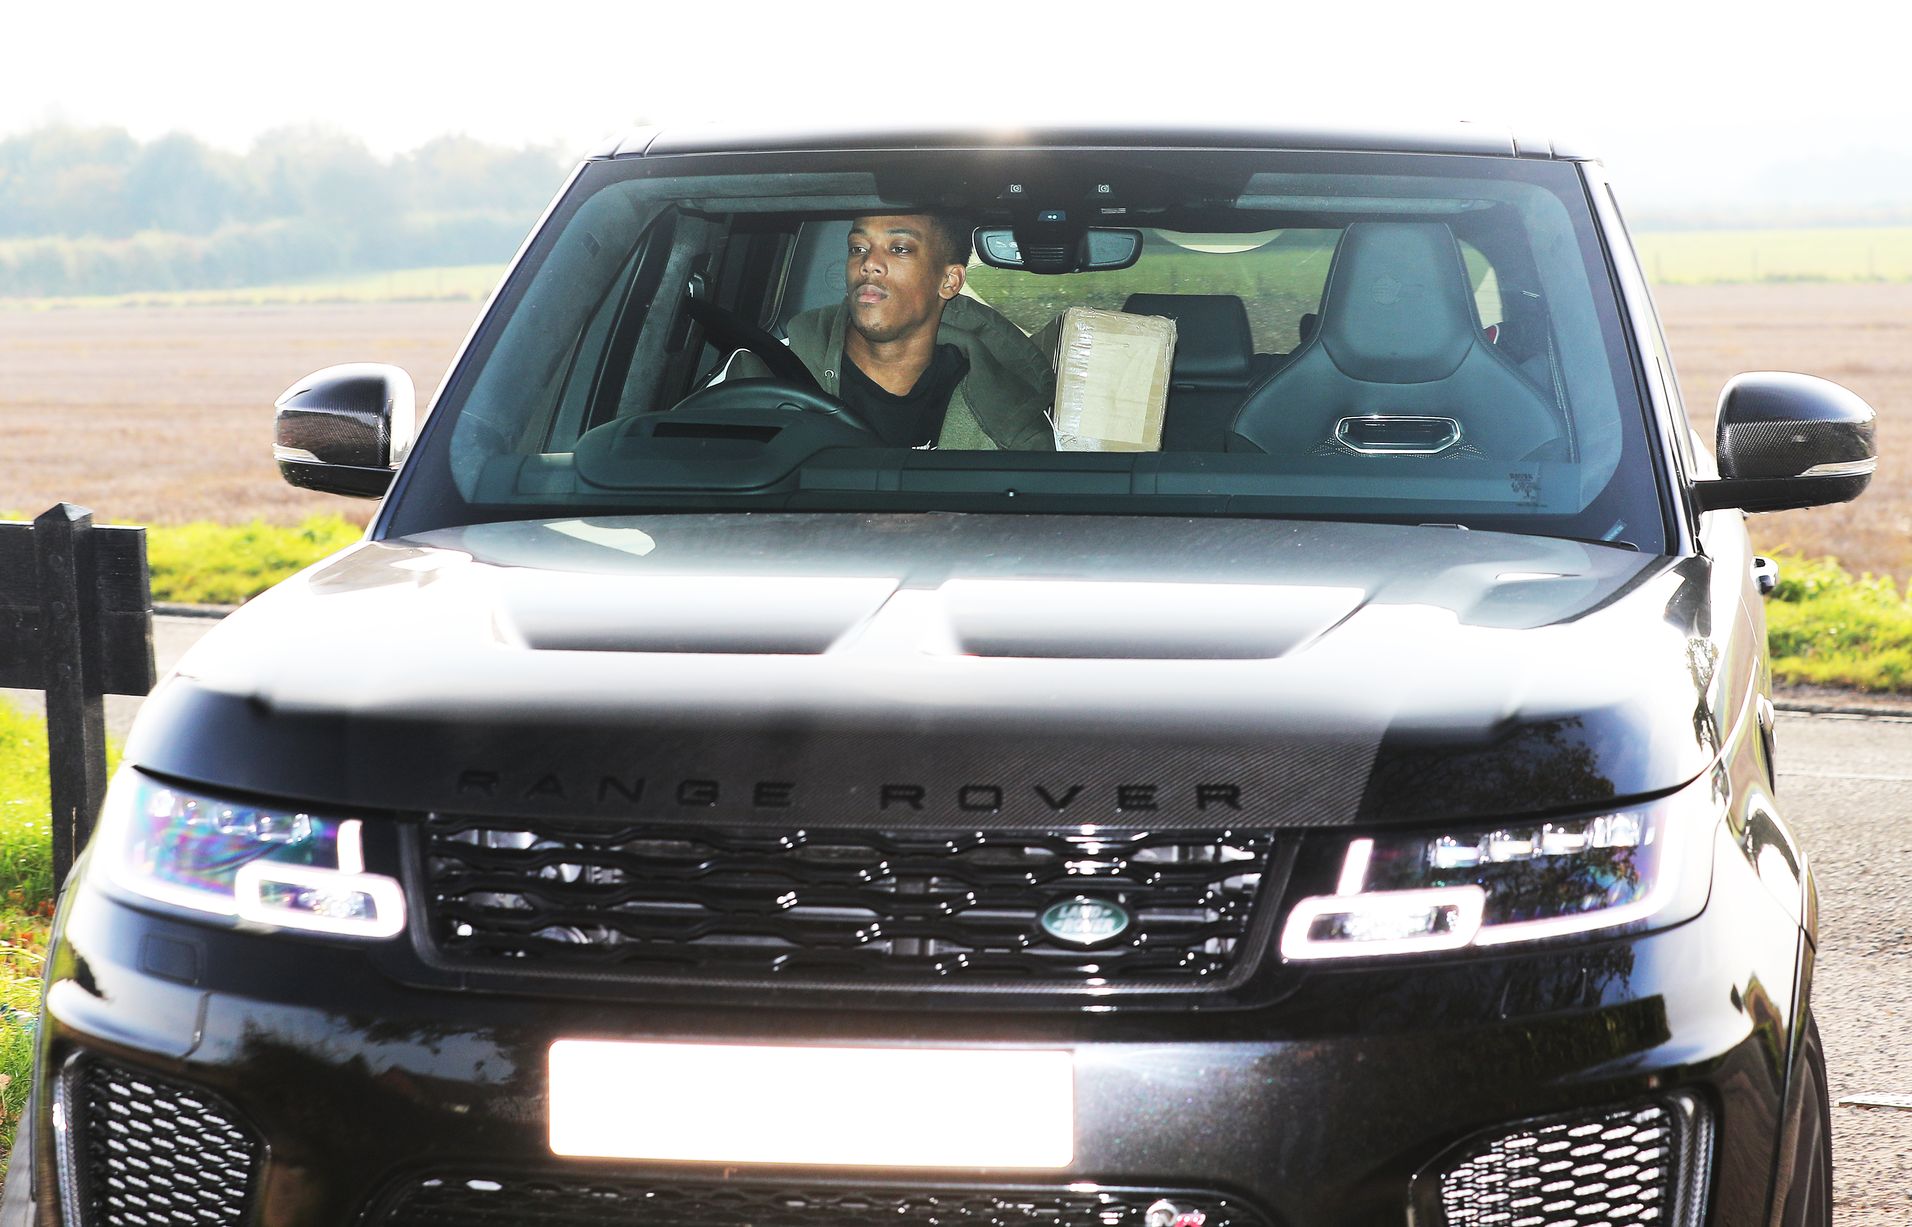 Manchester United players arrive for training after Chelsea win - Bóng Đá